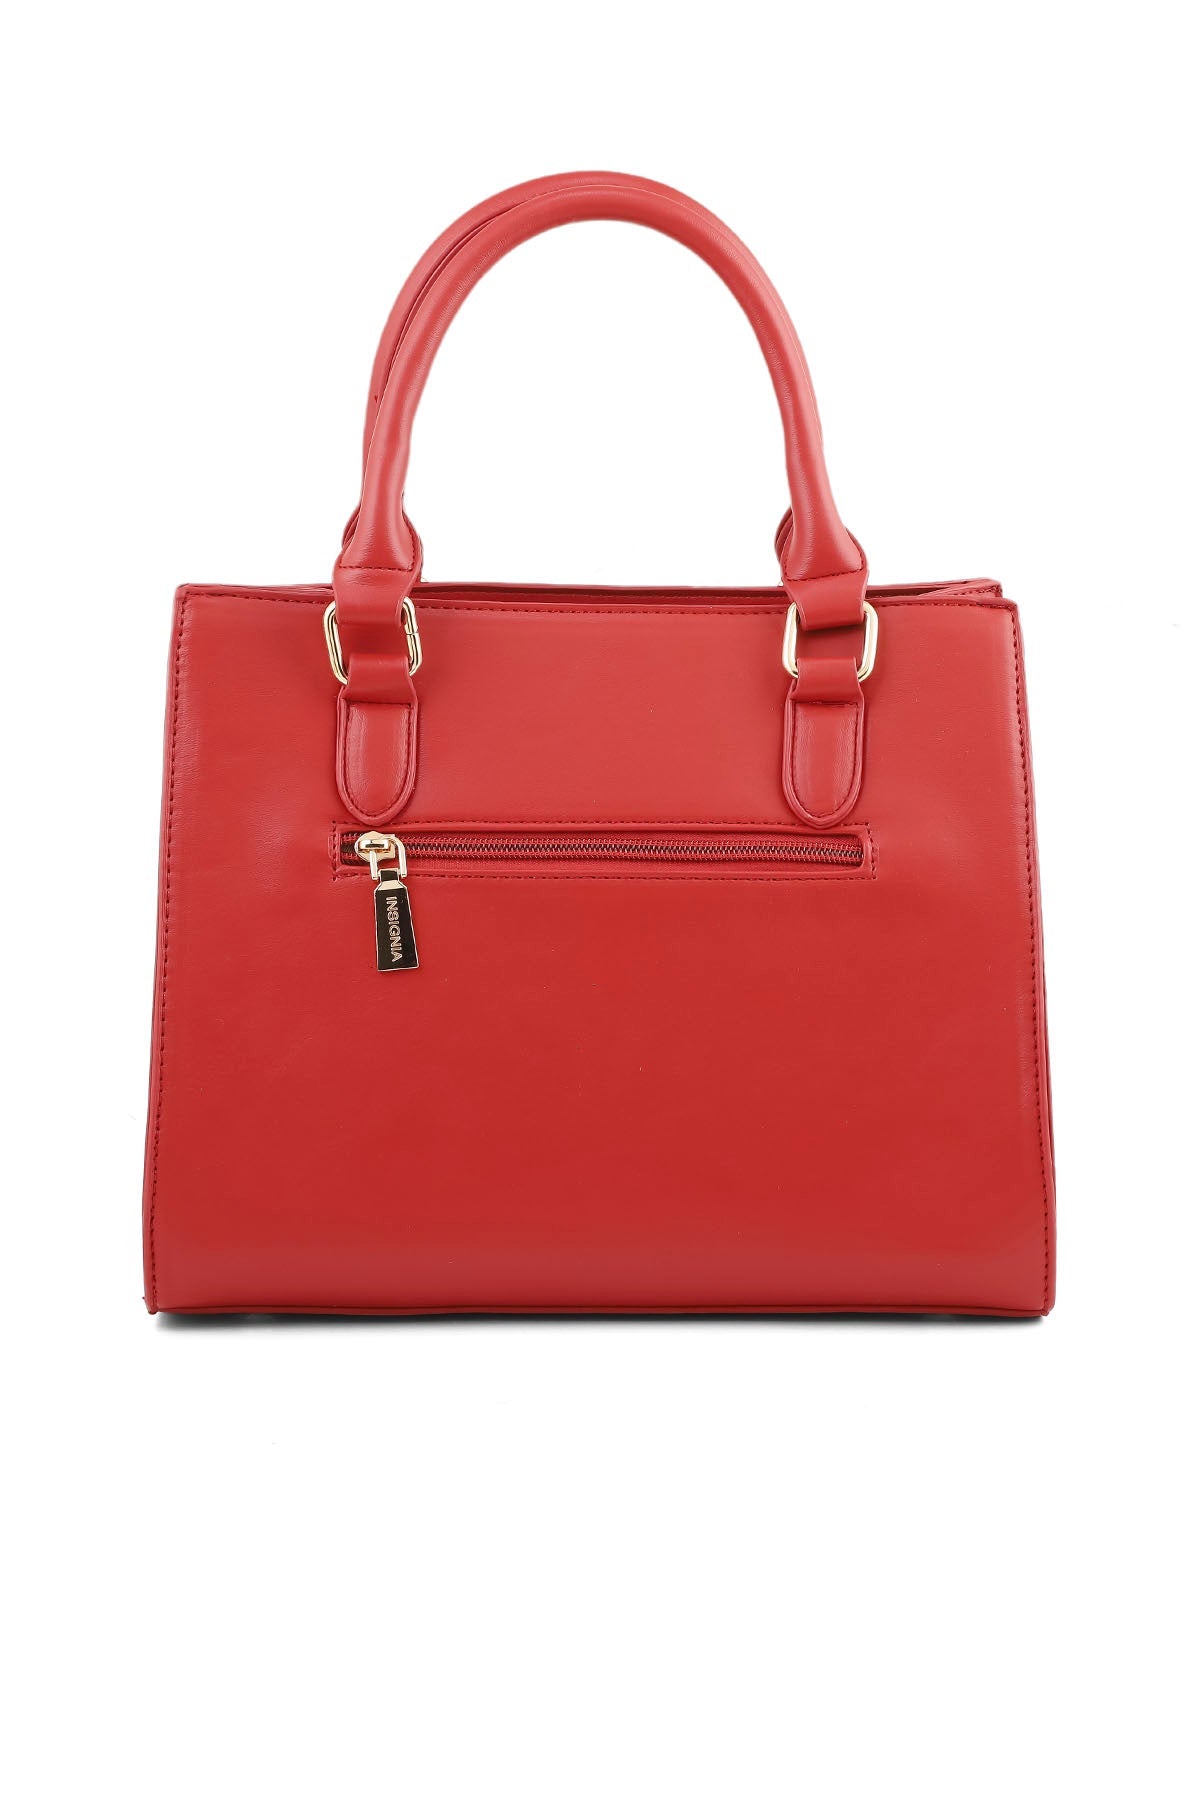 Formal Tote Hand Bags B15053-Red